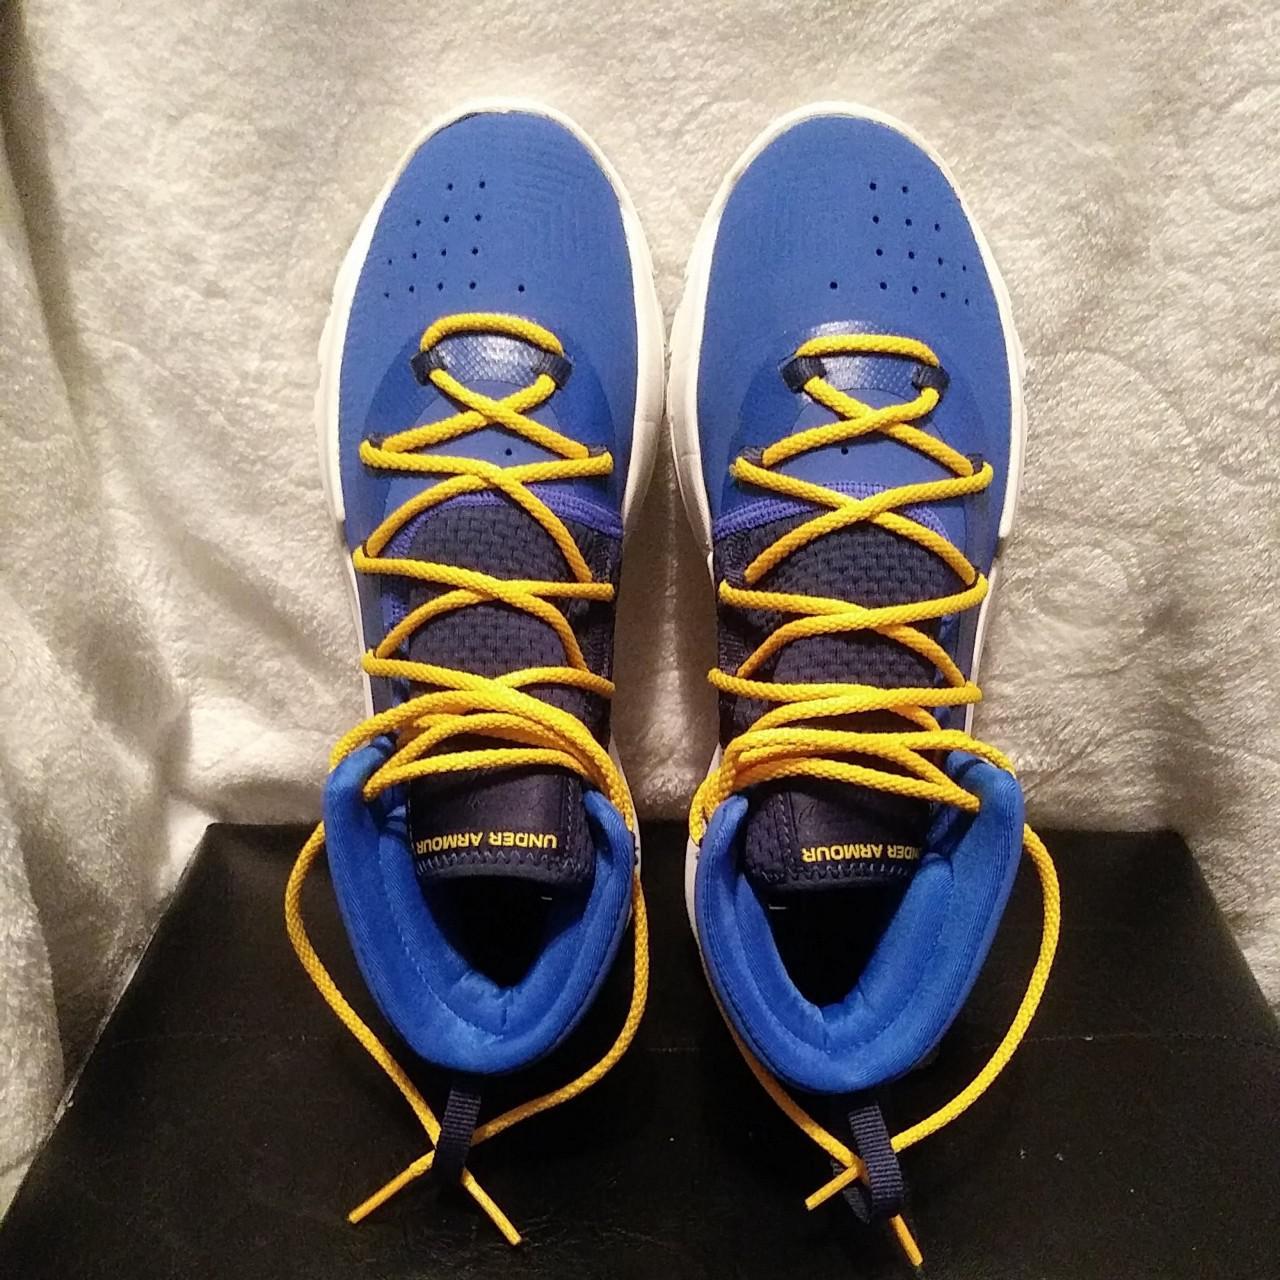 Under Armour SC Stephen Curry Basketball Sneakers Blue Yellow Size 5.5